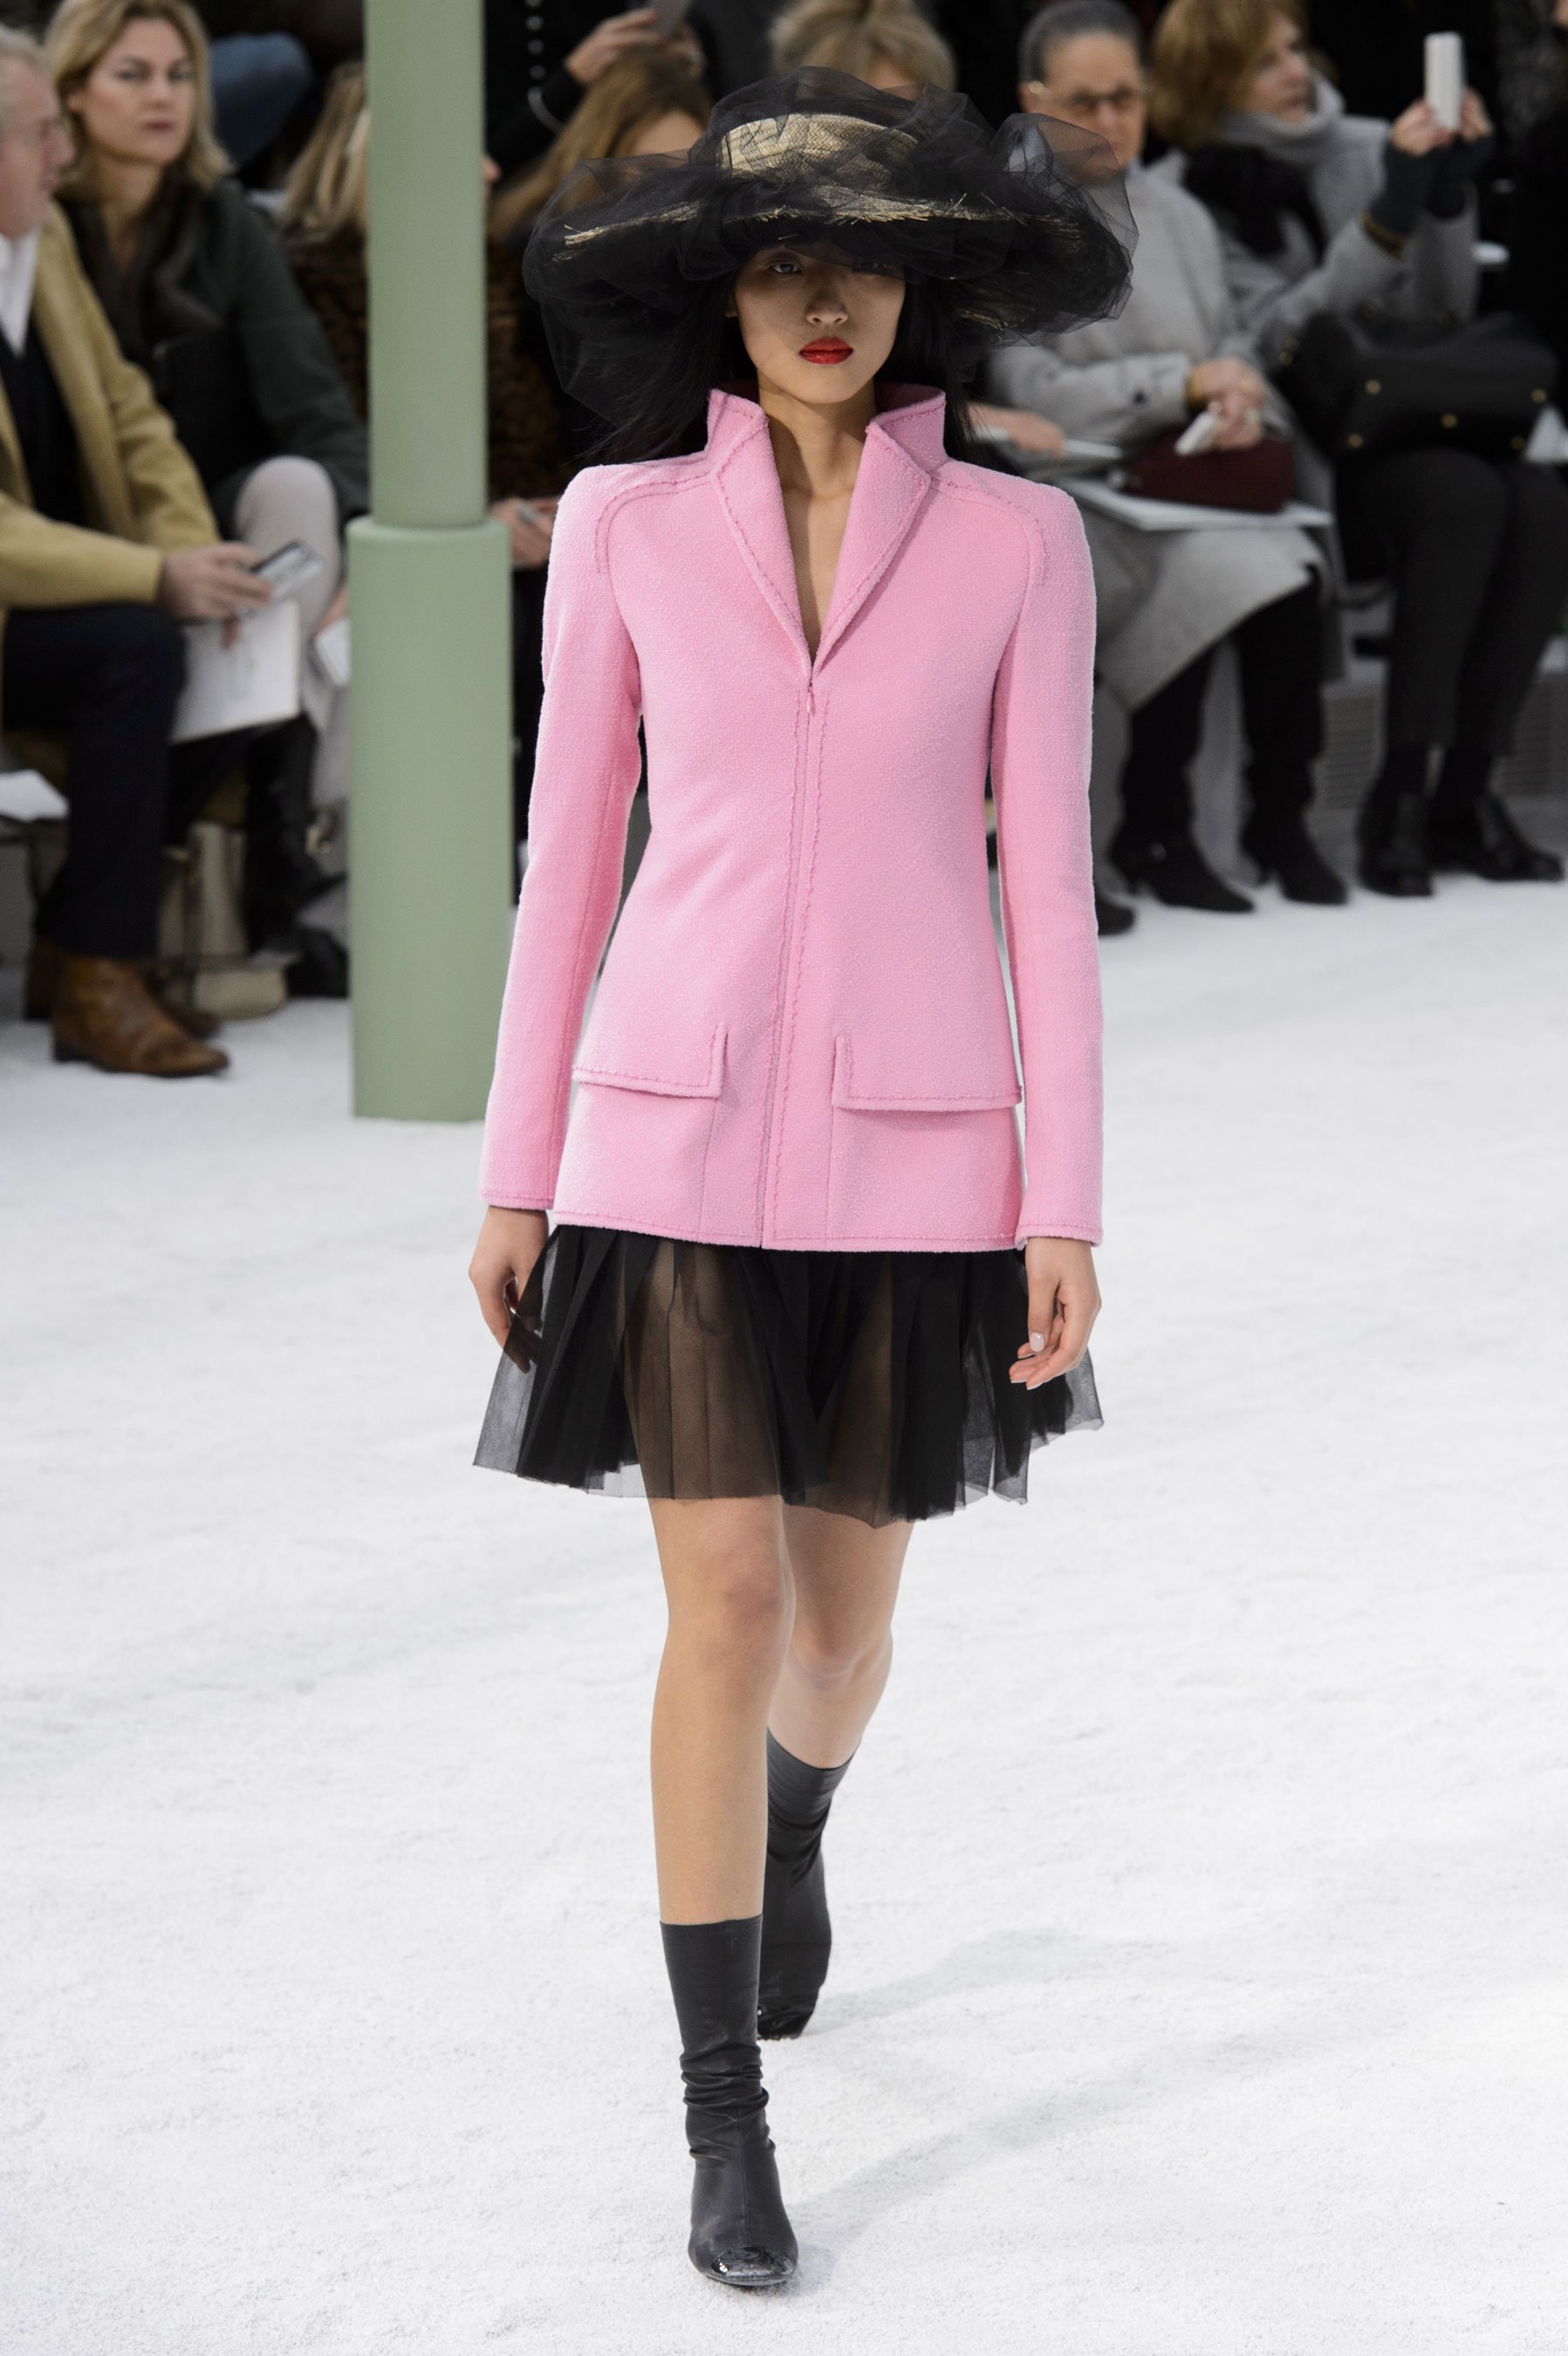 chanel haute couture spring 2015 pfw 7 luping